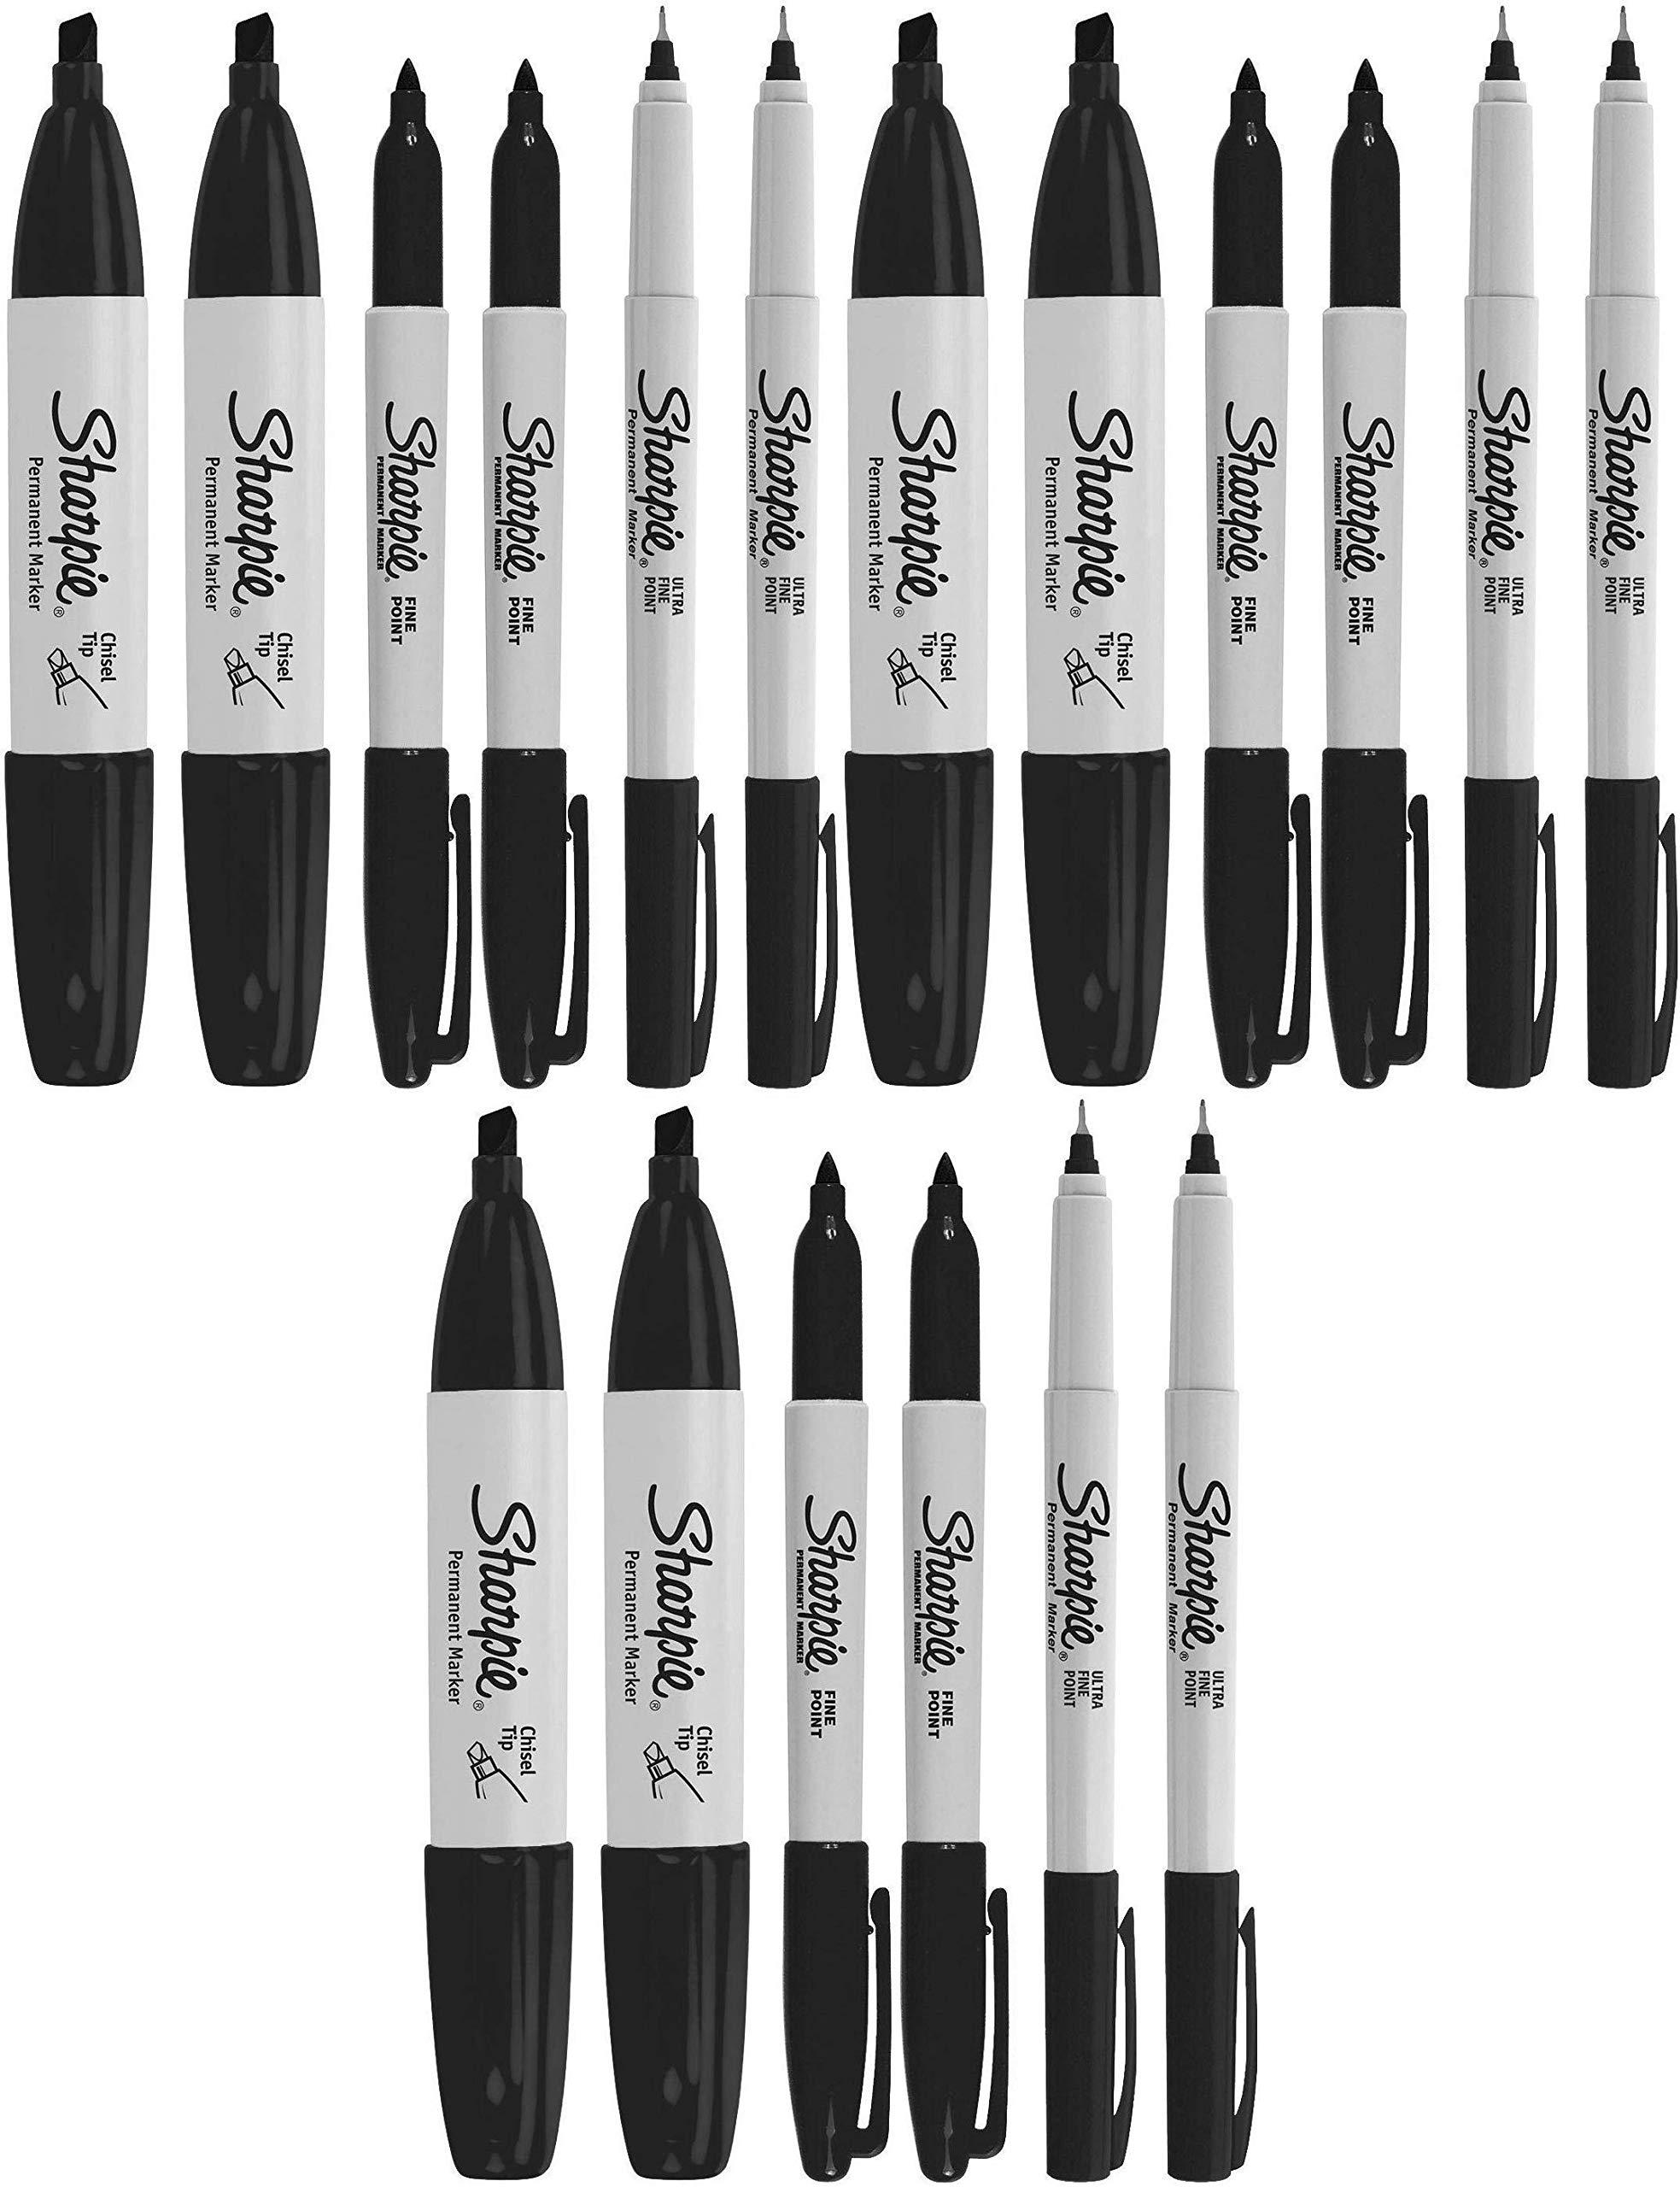 sharpie permanent markers, 6 pack assorted sizes, ultra fine tip, fine tip and chisel tip permanent markers - black pack of 3